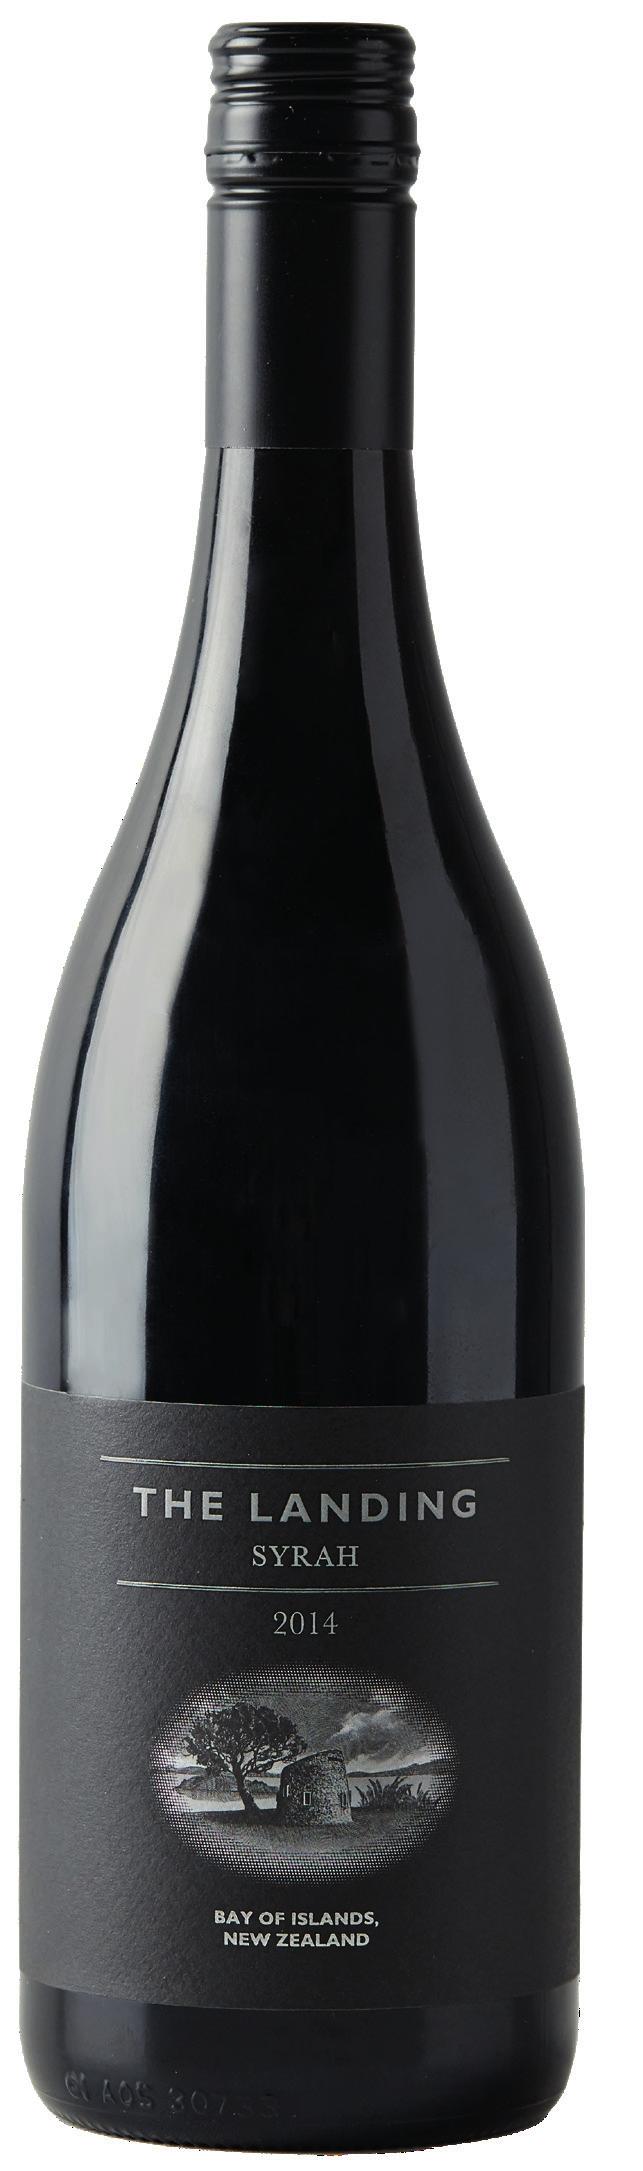 THE LANDING SYRAH 2014 Grown on the coastal slopes overlooking the Bay of Islands, the 2014 Syrah is an expression of a deep and elegantly concentrated core of black-berried fruit, spice and